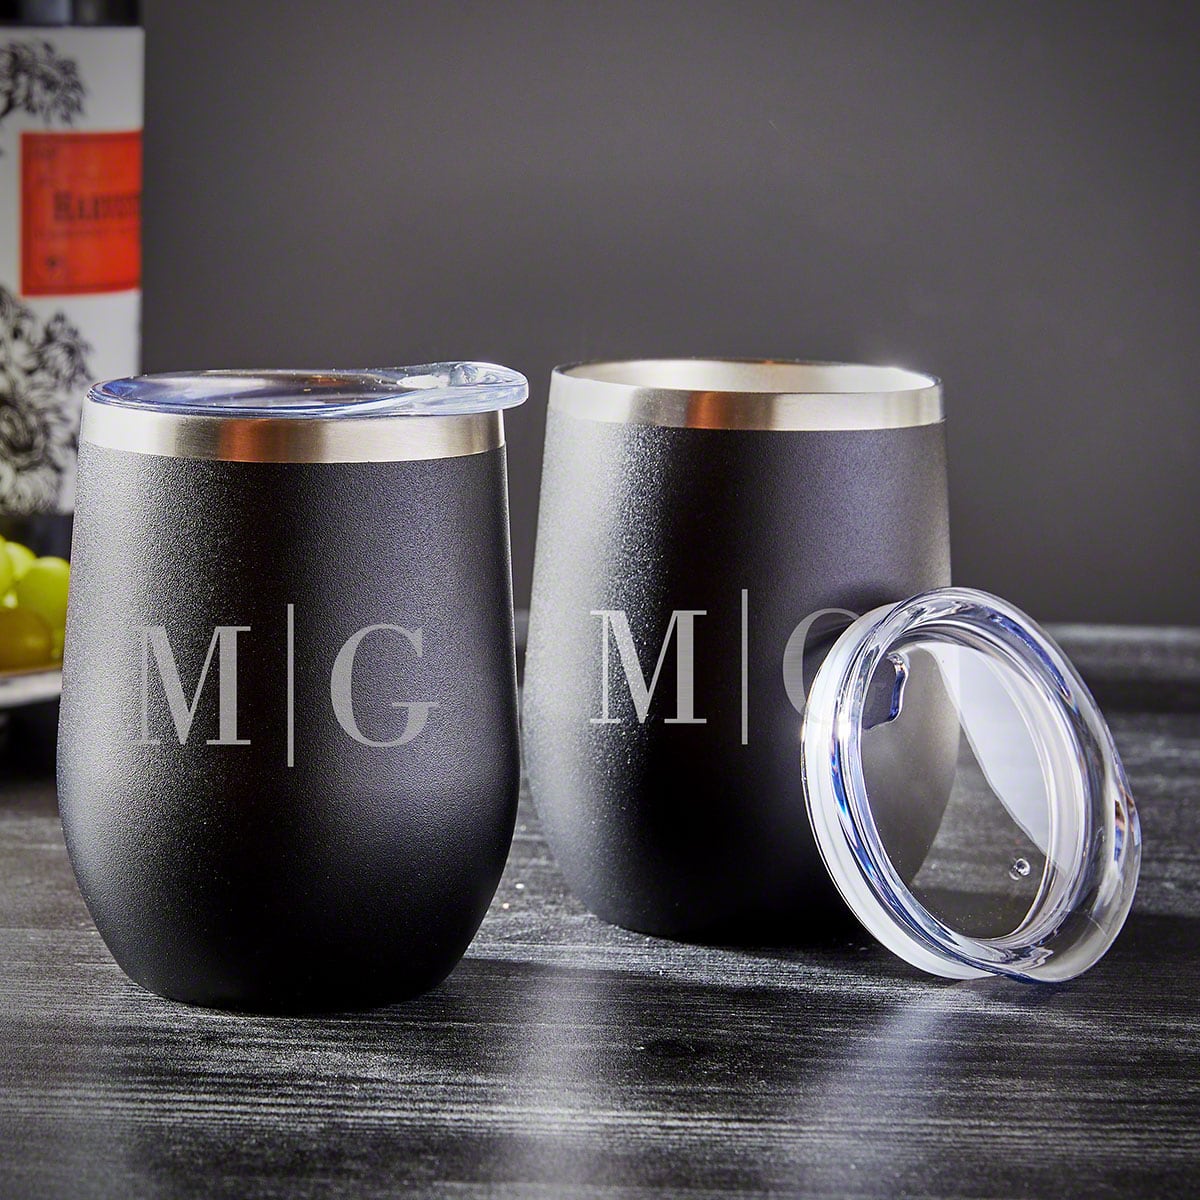 Engraved Stainless Steel Wine Tumblers - Set of 2